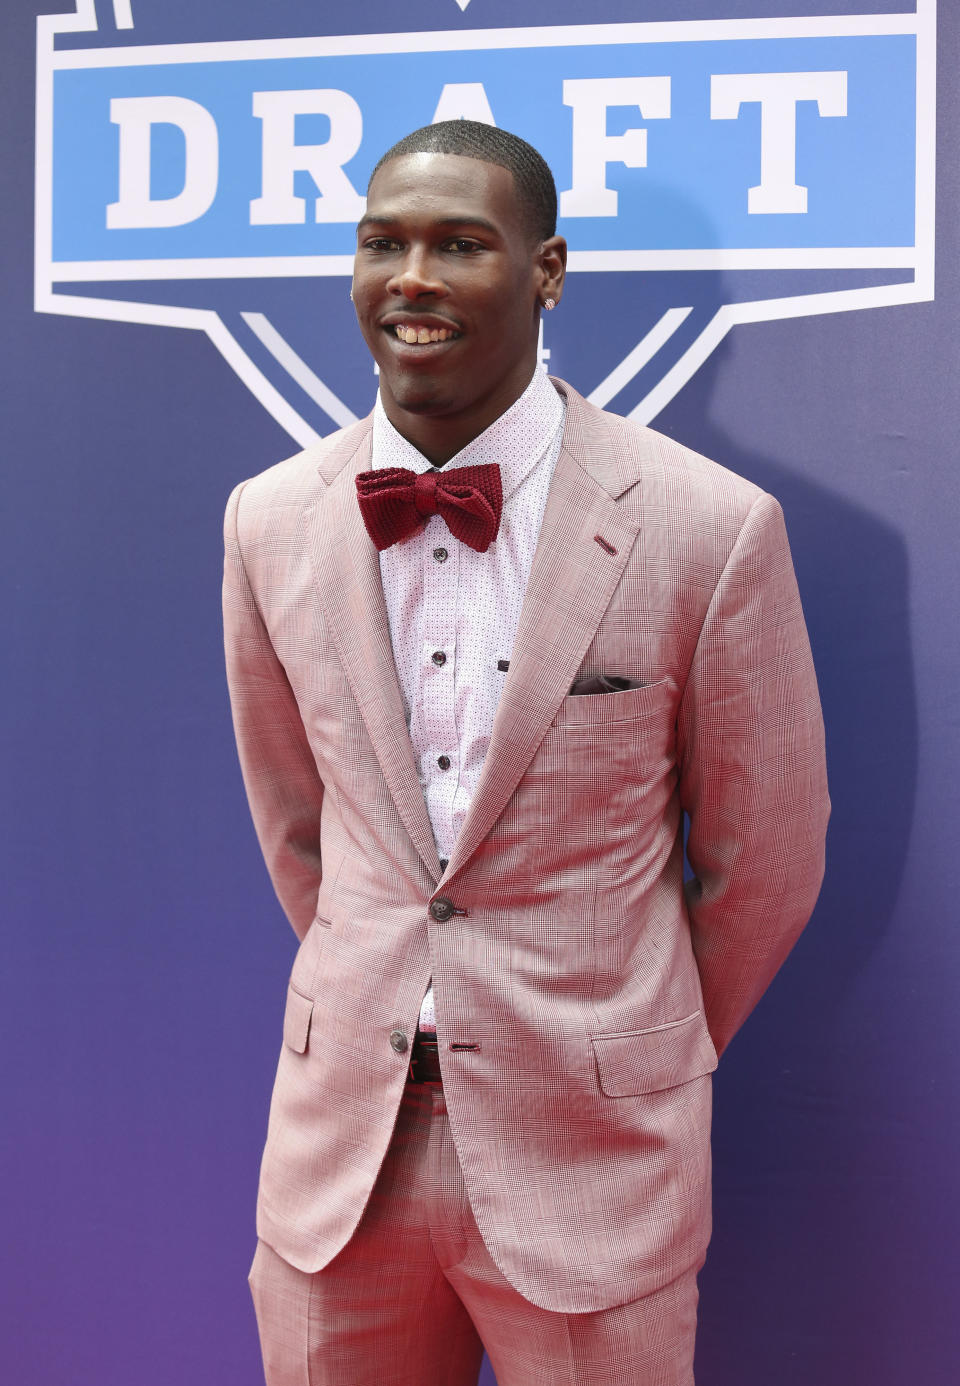 USC wide receiver Marquis Lee poses for photos on the red carpet for the first round of the 2014 NFL Draft, Thursday, May 8, 2014, in New York. (AP Photo/Craig Ruttle)